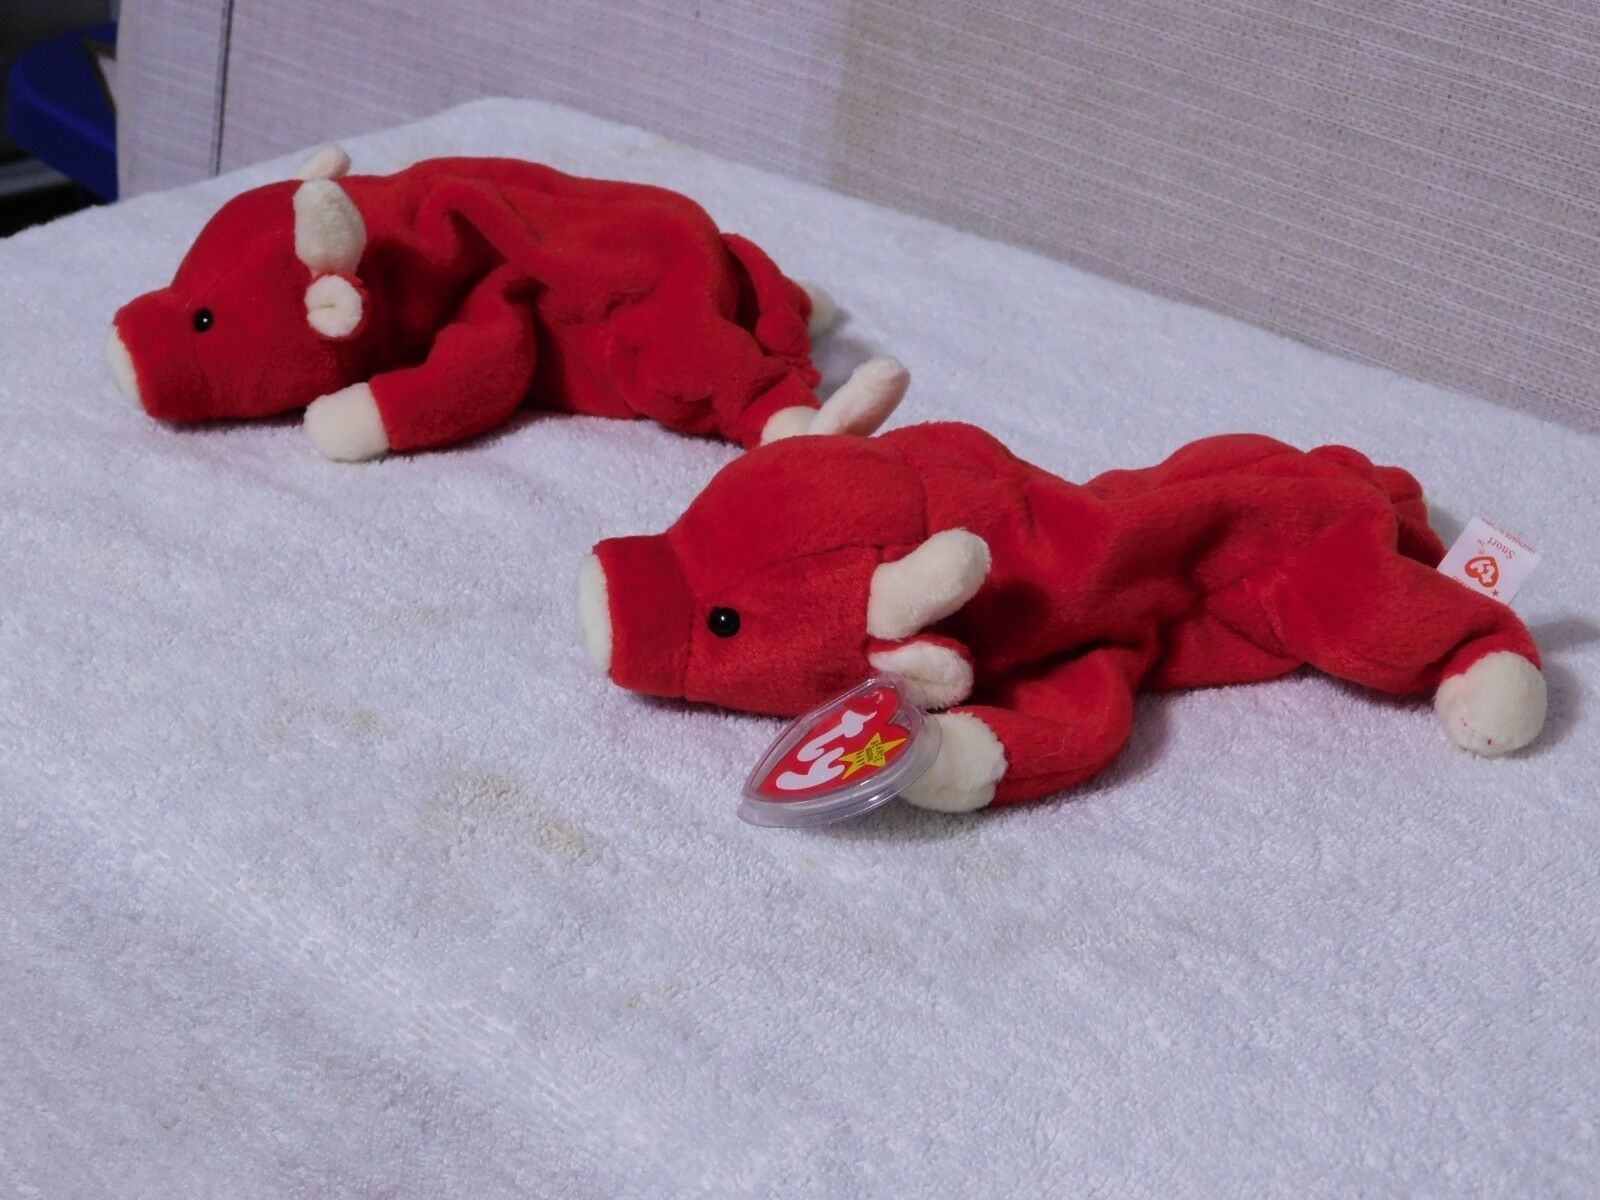 RARE-VINTAGE-1995-SNORT-TY-BEANIE-BABY-RED-BULL-PLUSHIE WITH TAG - 4002 5 - £233.67 GBP